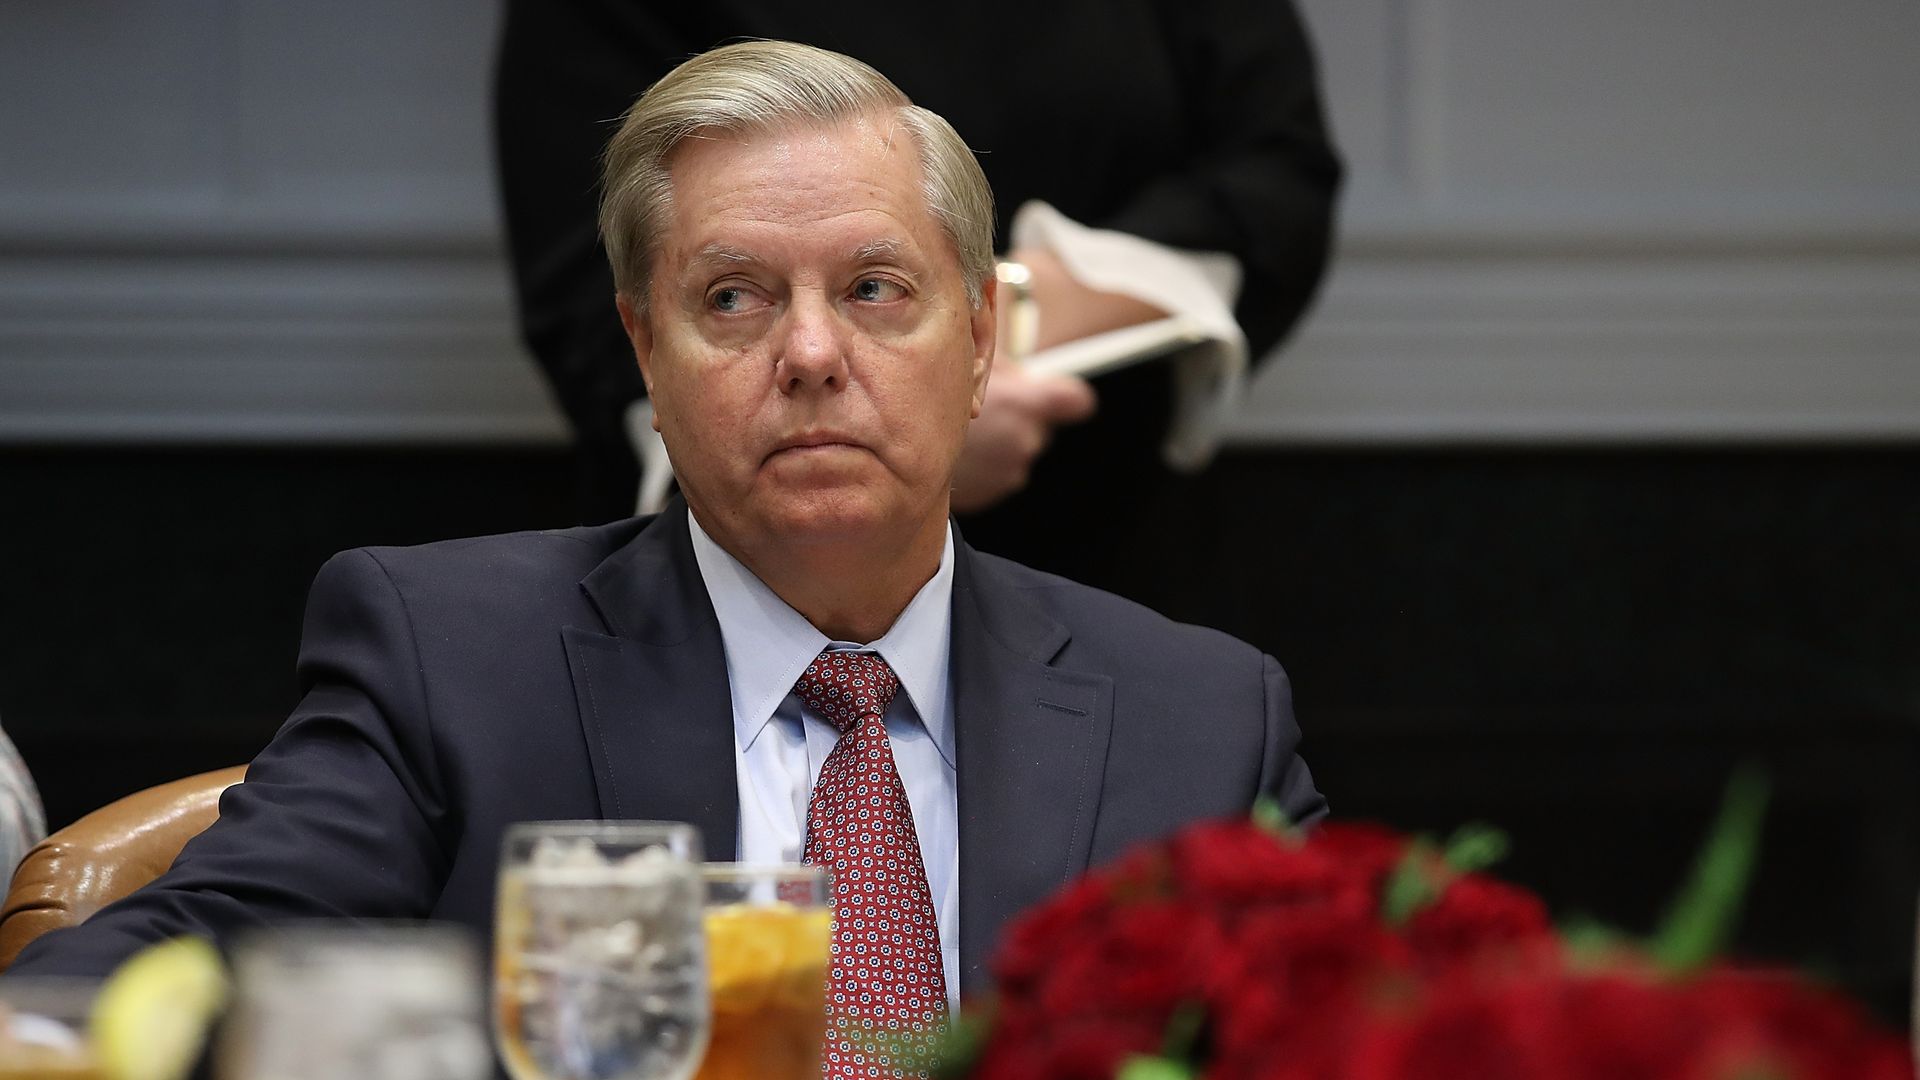 Lindsey Graham looks mad, looks sideways out his eyes